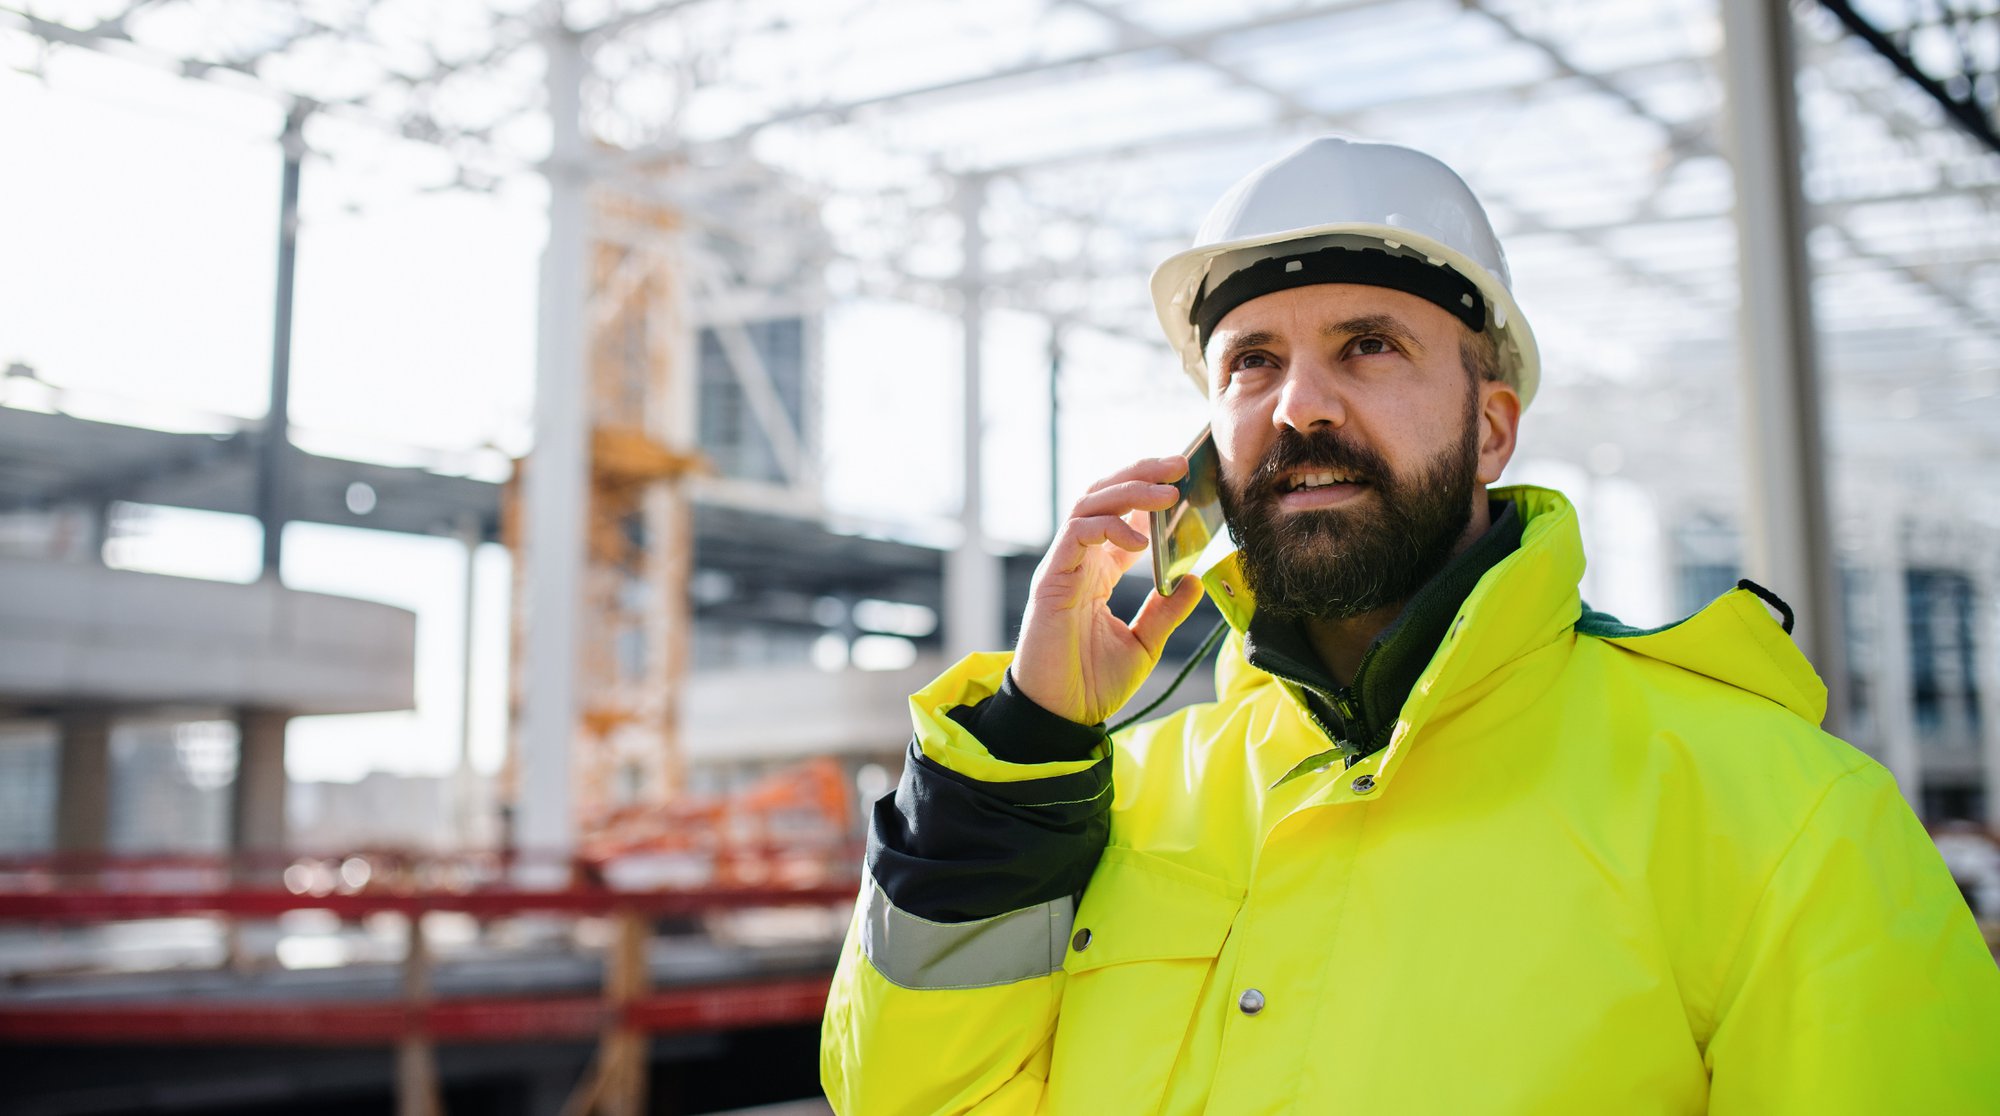 Man in high-vis and hard hat using a tough phone